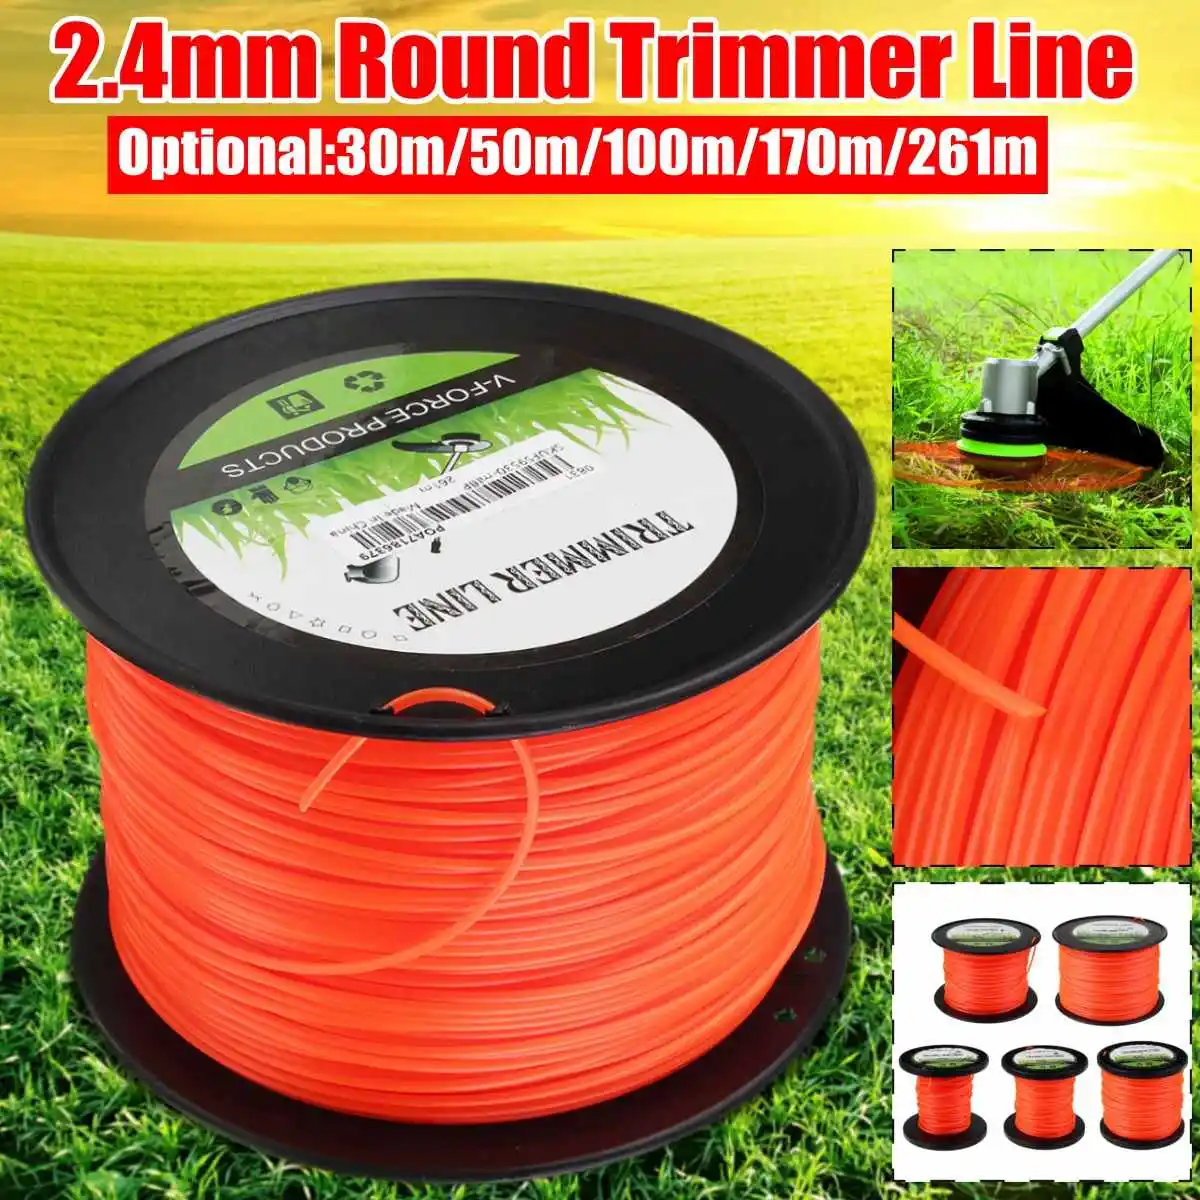 Lawn Mower Wire Blades Trimmer Cutter Gardening Tools Parts Cable Grass Trimming 